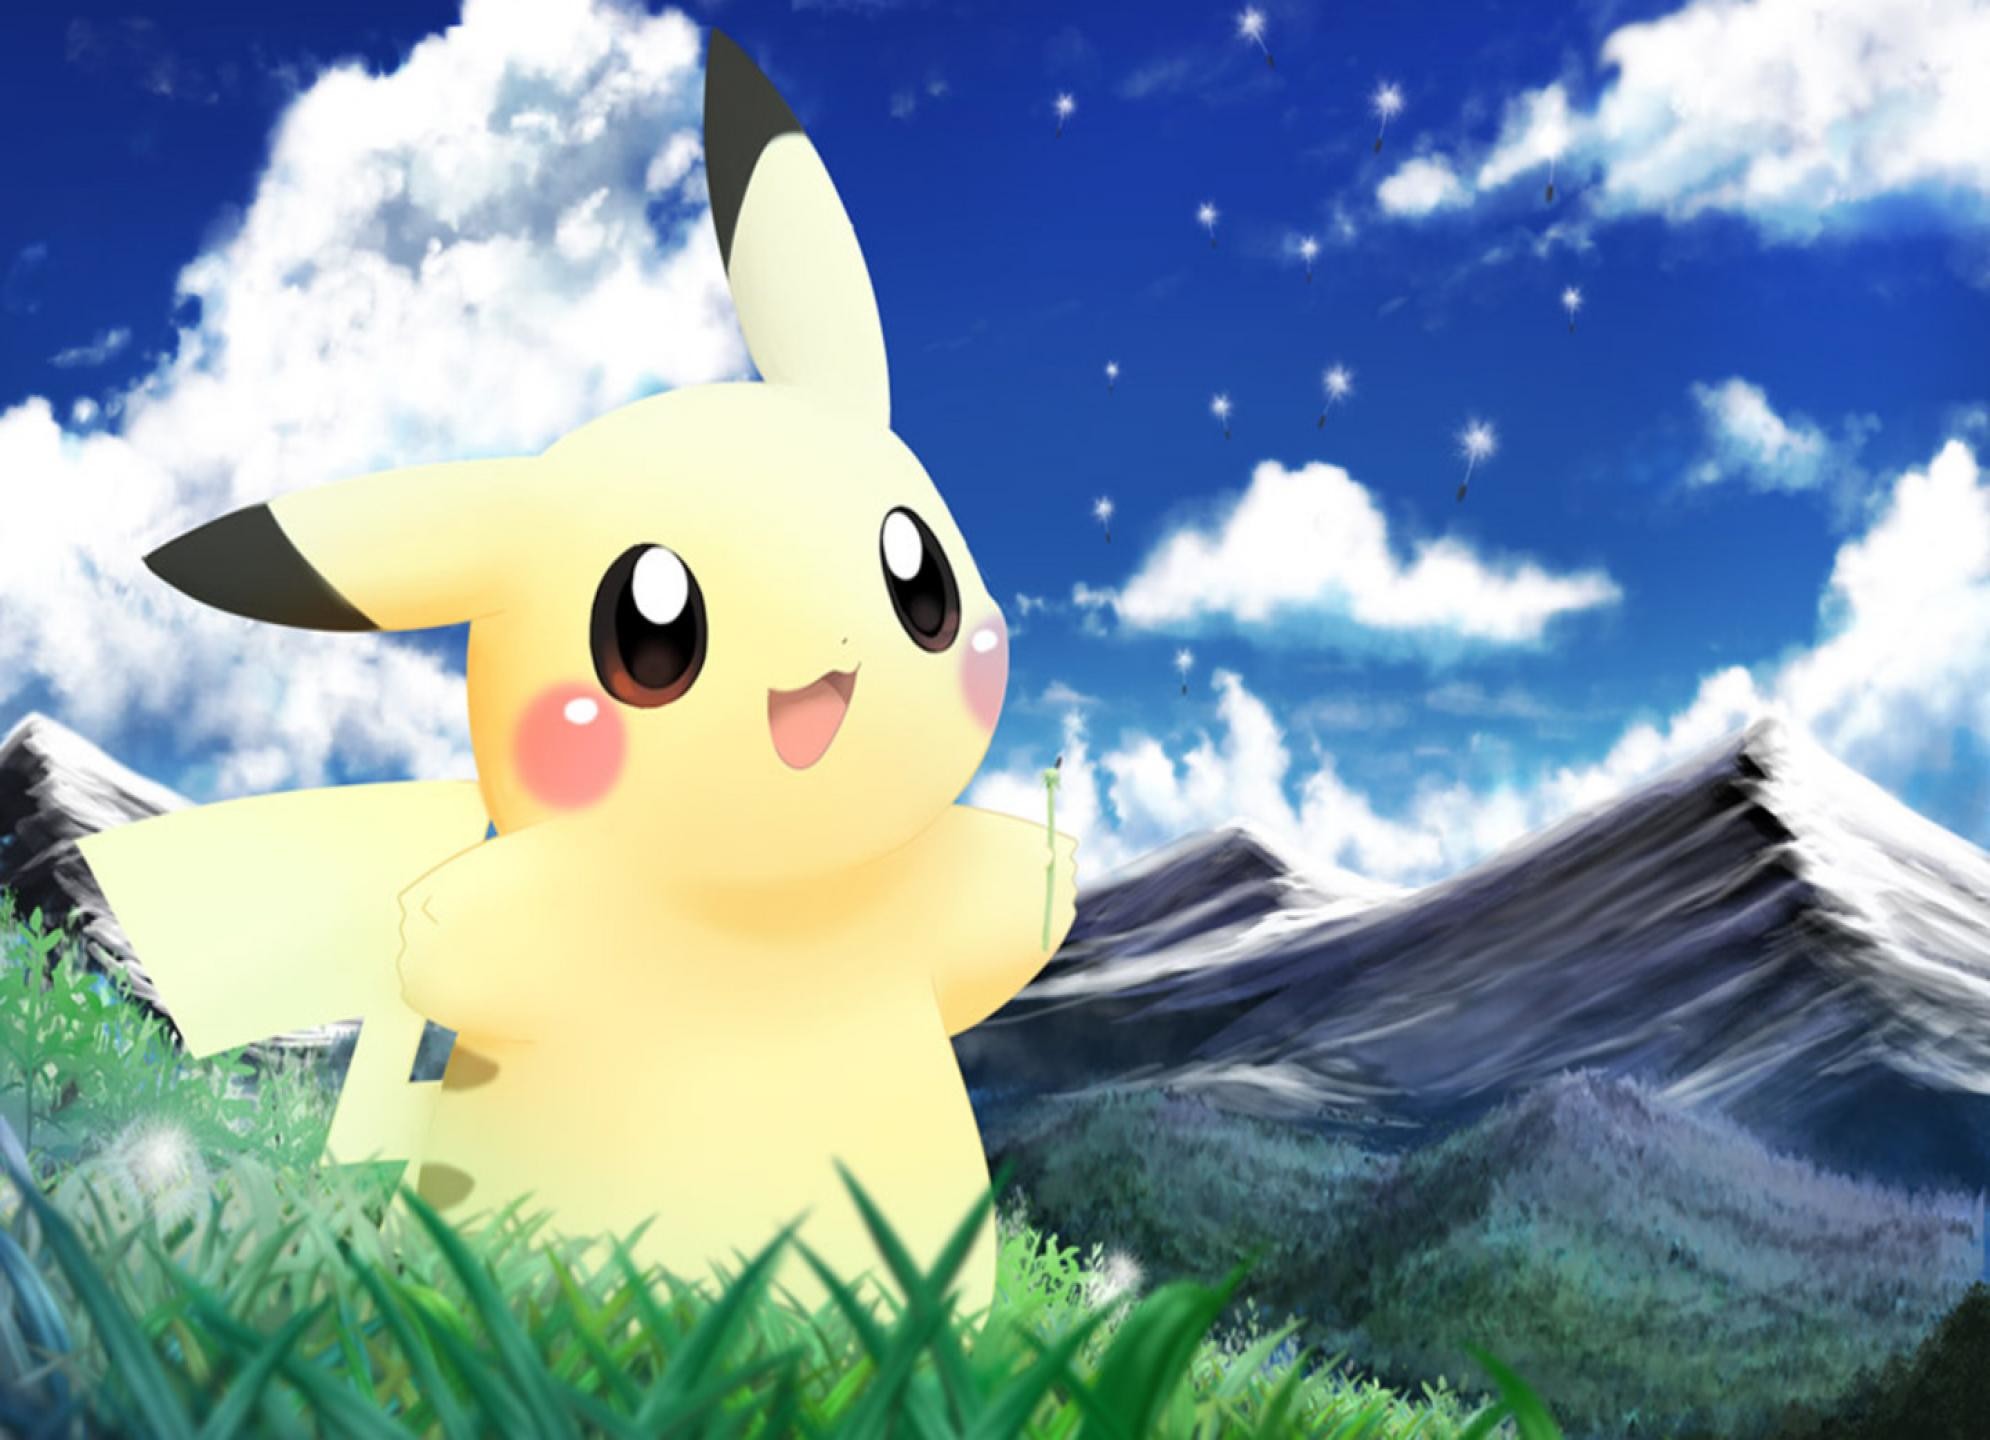 HD Wallpaper and background photos of Pikachu Wallpaper for fans of Pikachu  images.